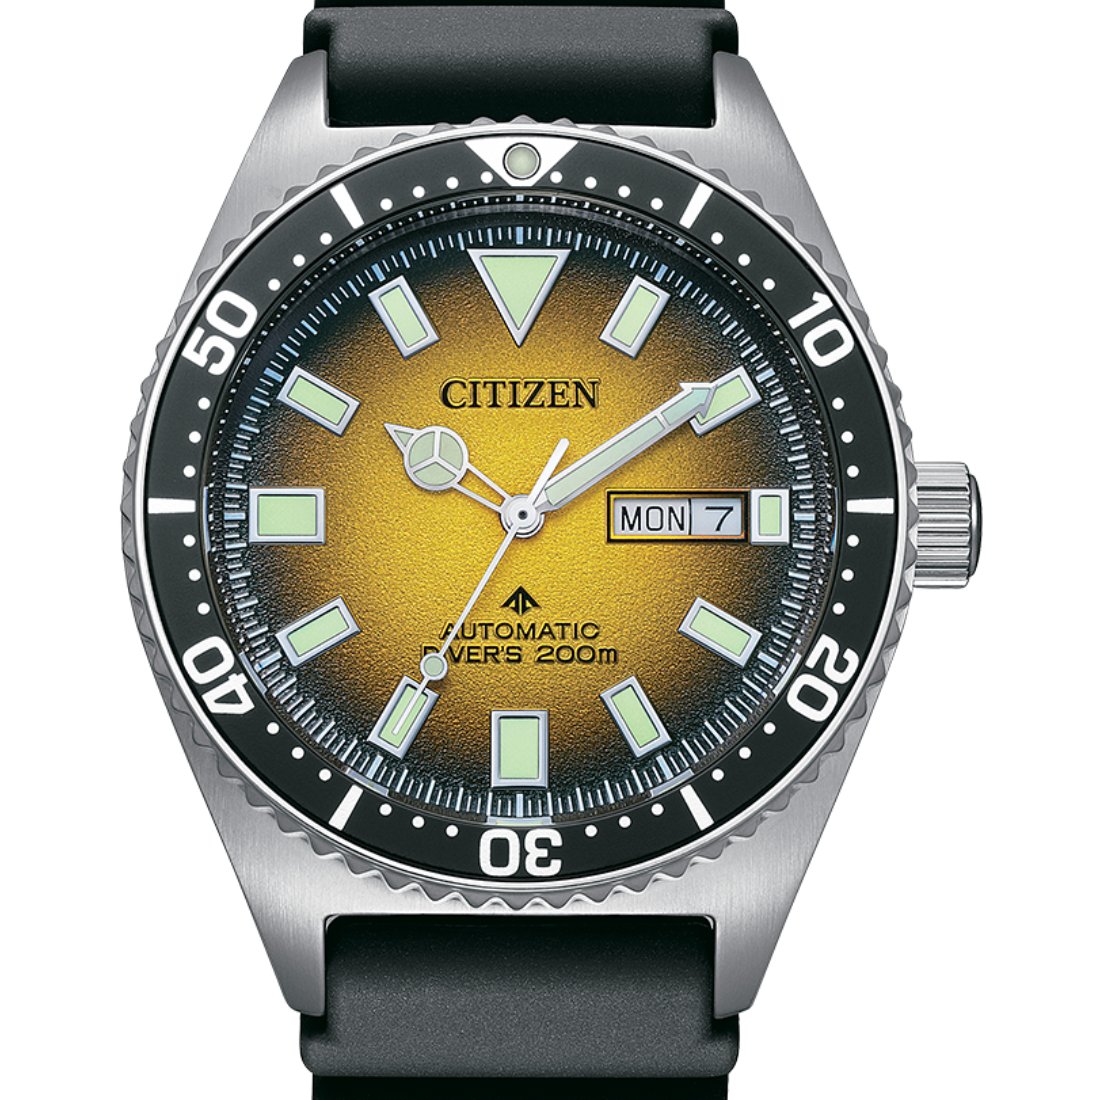 Citizen NY0120-01X Promaster Marine Yellow Dial Divers 200m Watch -Citizen